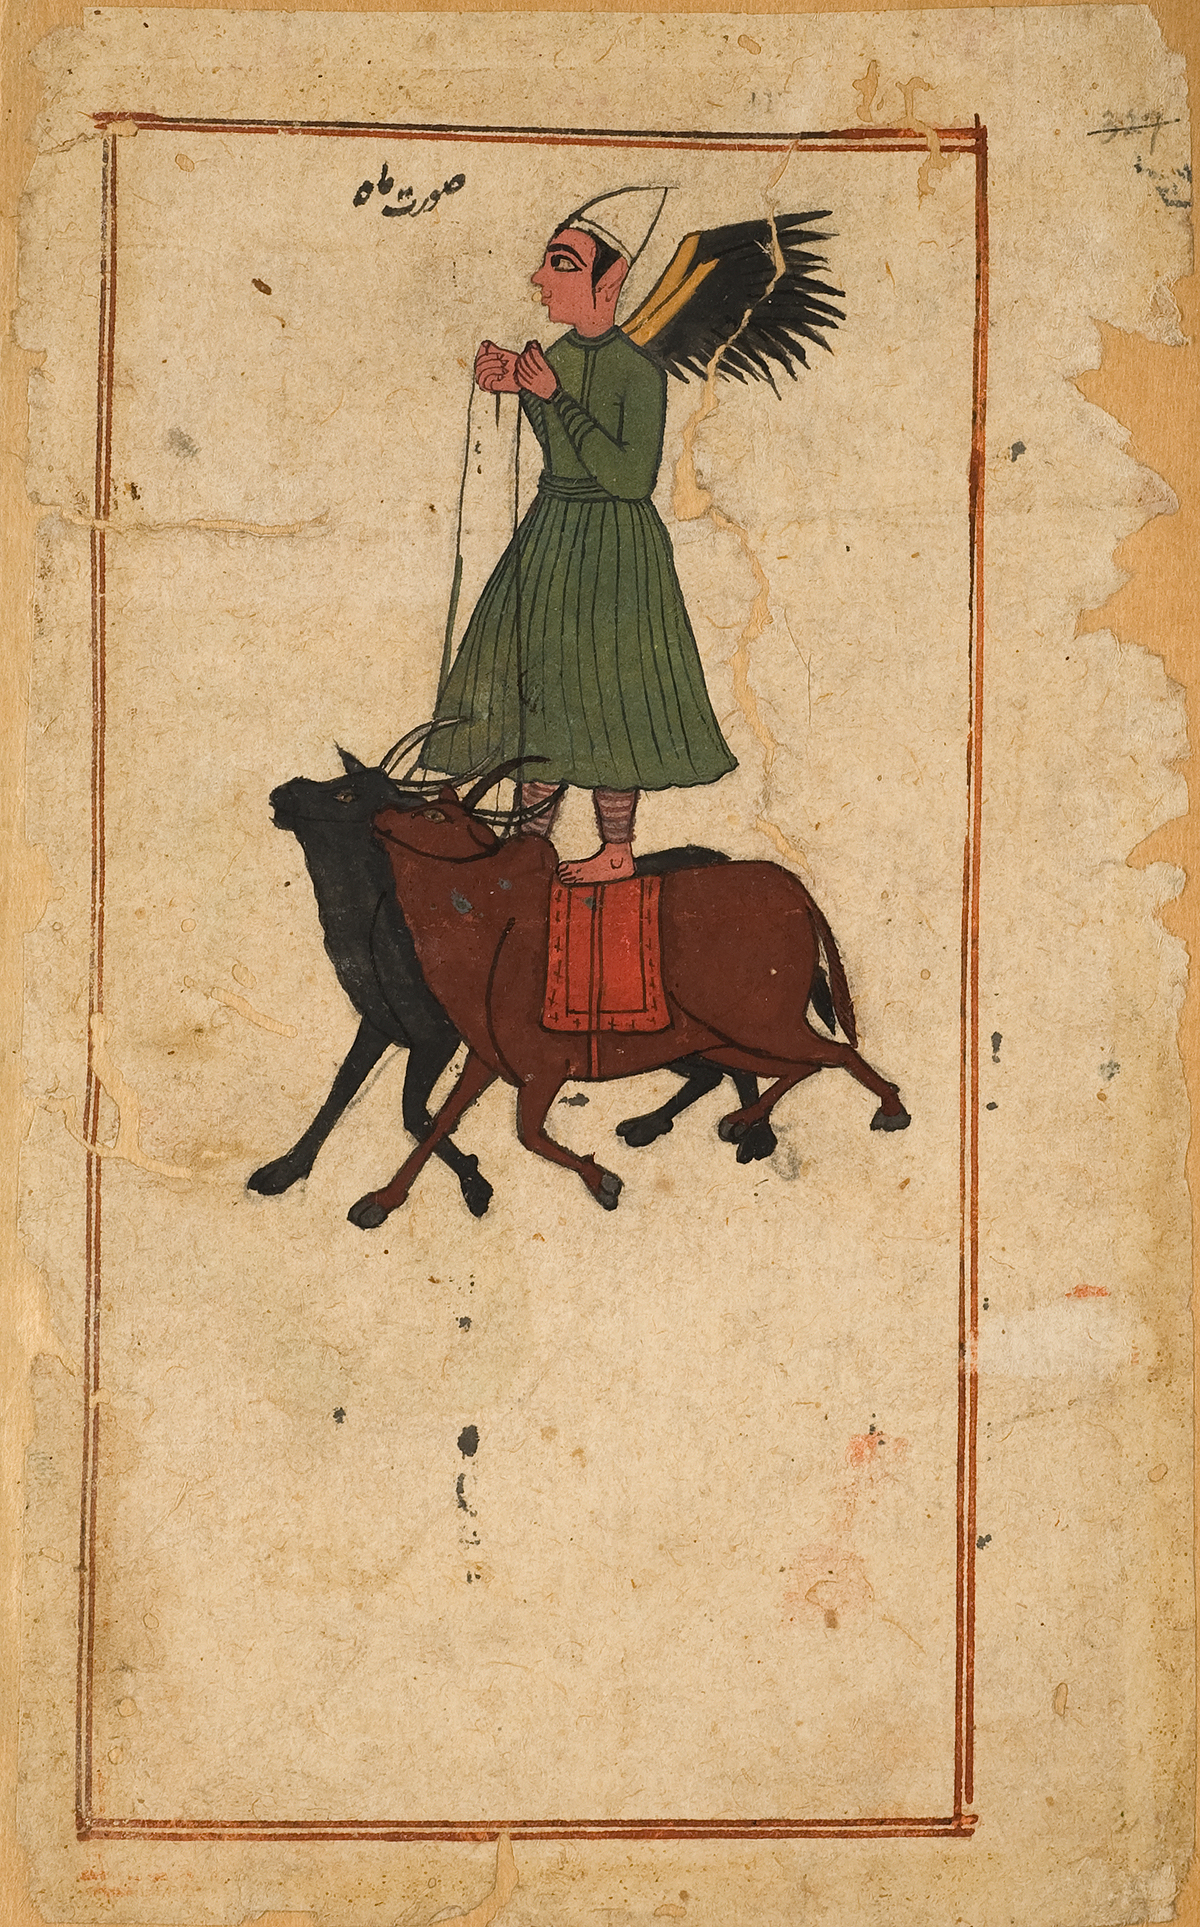 The moon, represented by a winged man standing on the backs of two running bulls, inside a red double ruled border.